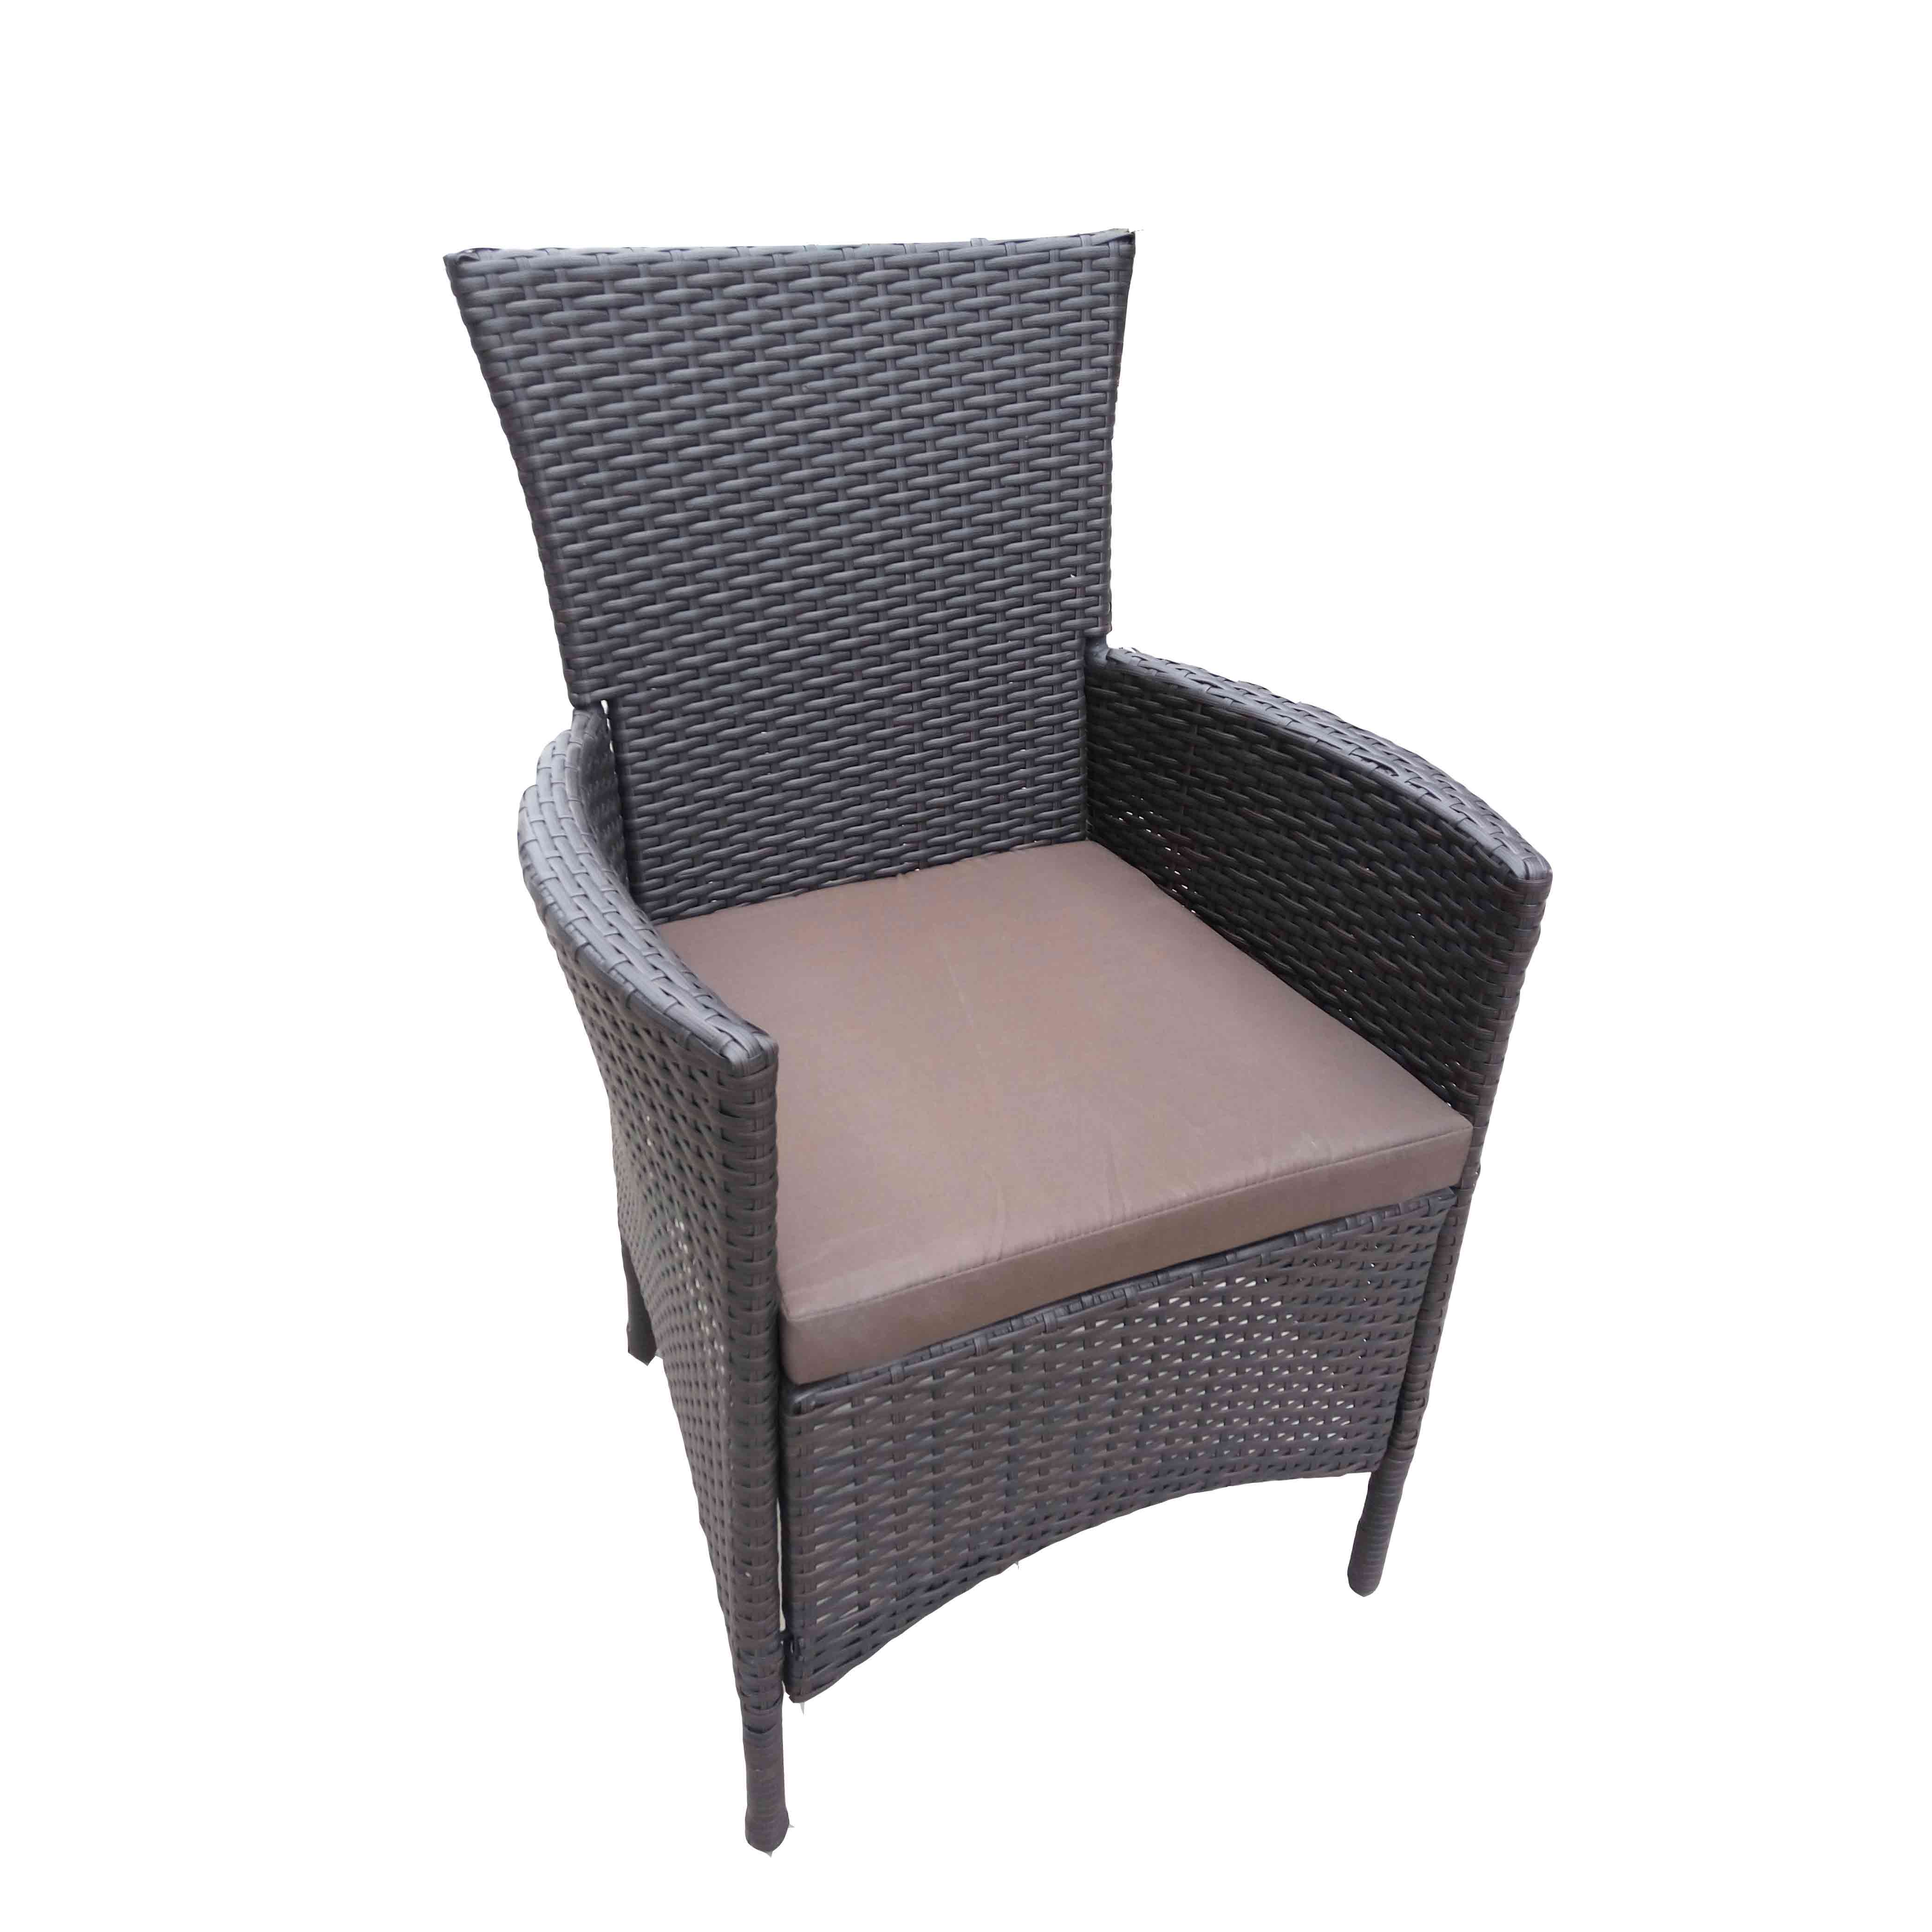 China Wholesale White Garden Chair Company - JJC3005 Steel Frame Stacking Wicker dinning Chair – Jin-jiang Industry